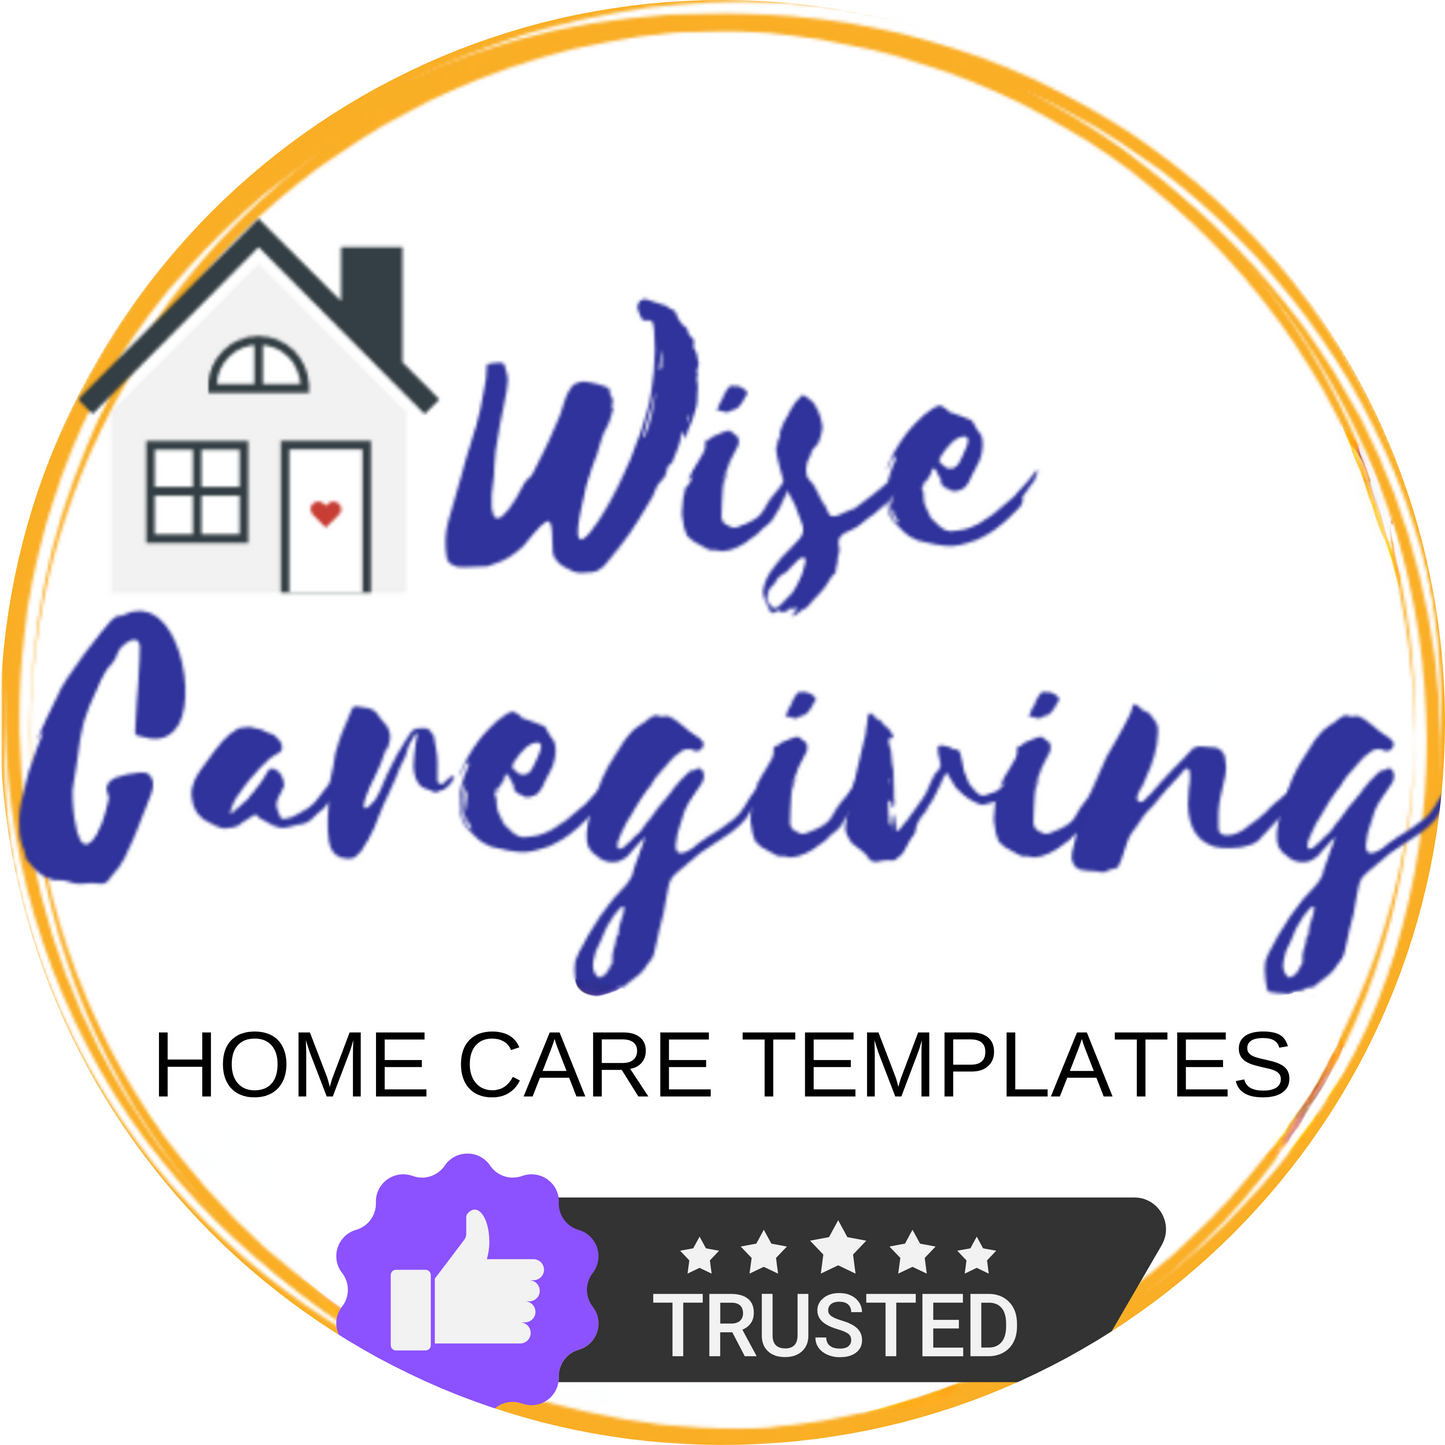 Home Care Intake Form Template